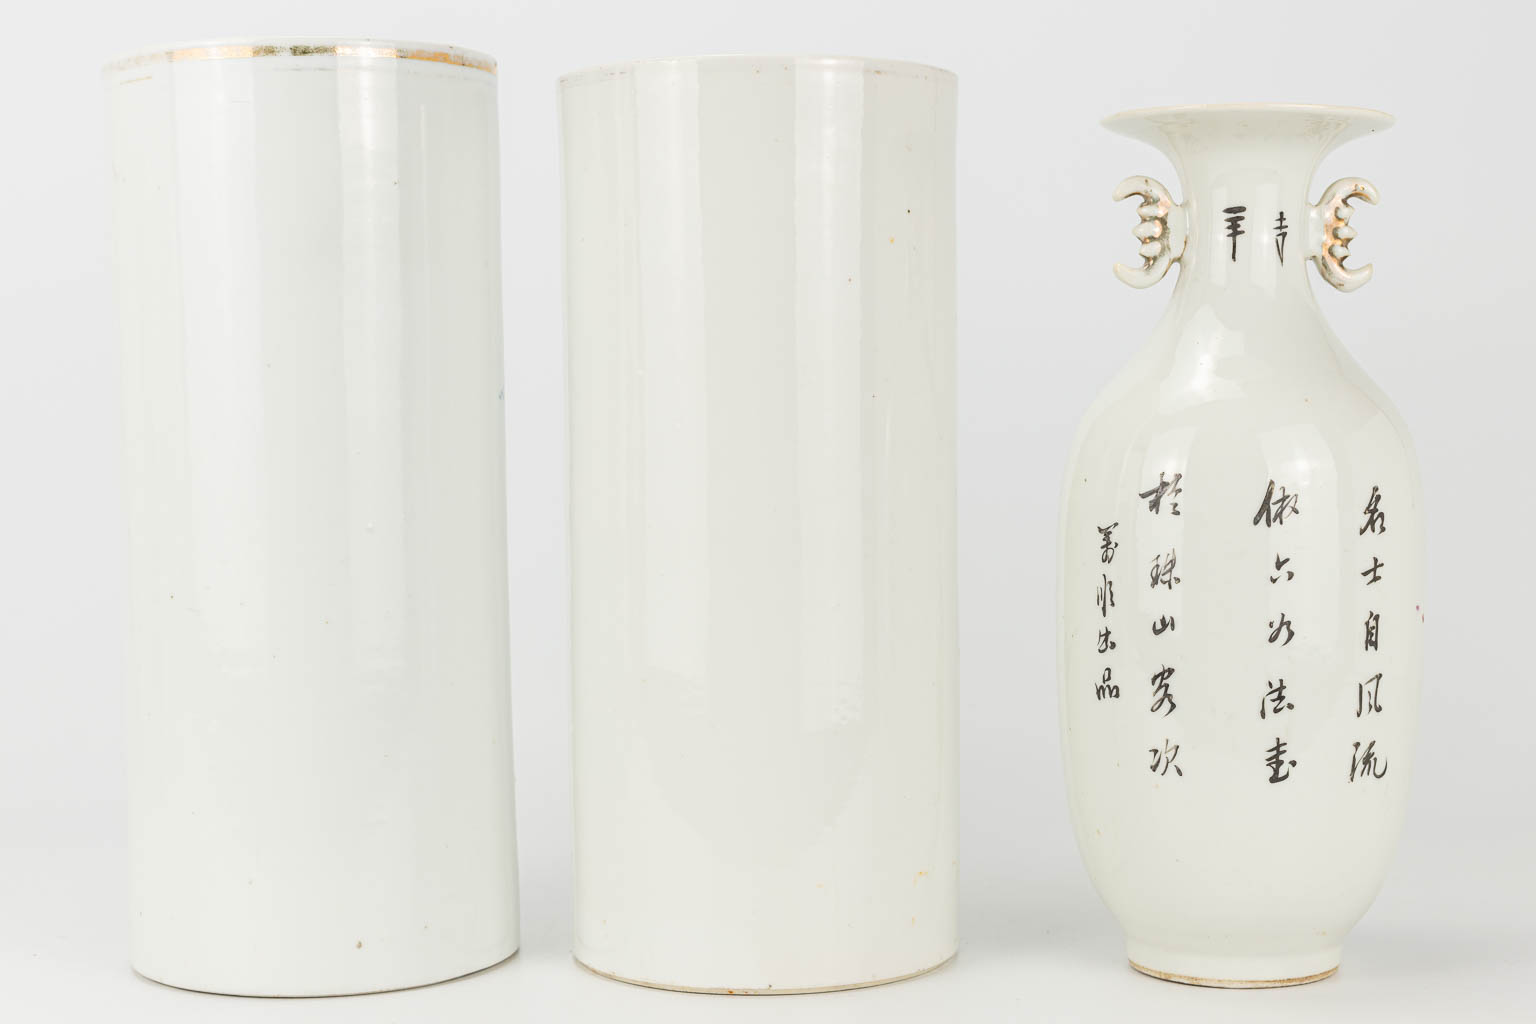 A collection of 4 hat stands and a small vase made of Chinese porcelain.